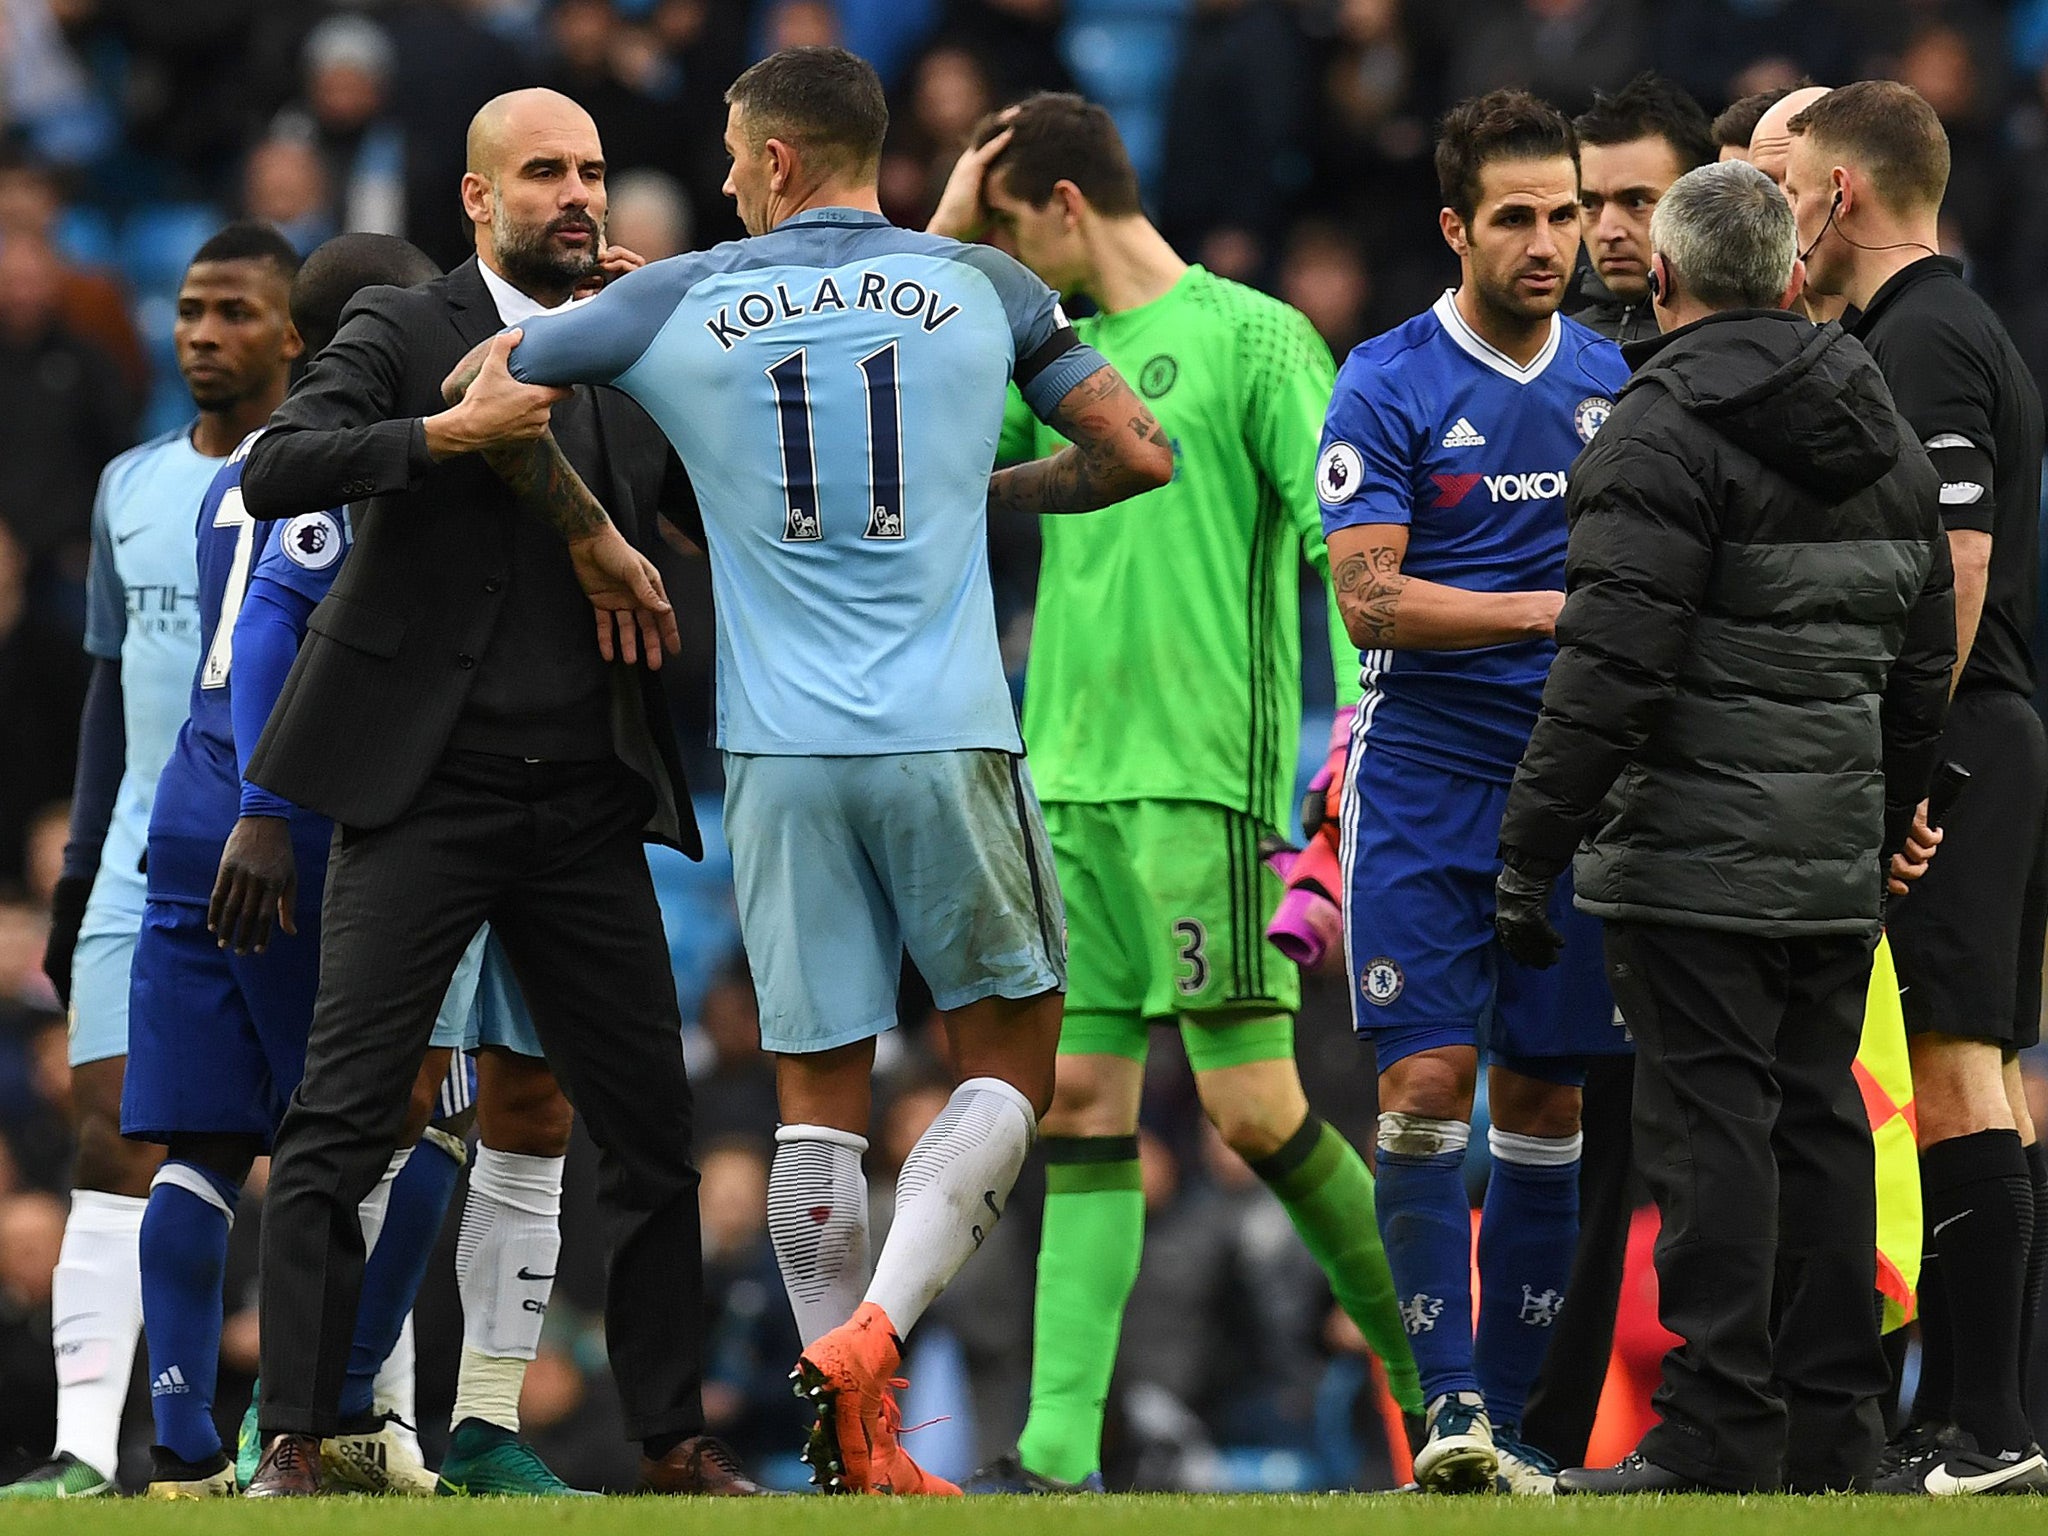 Guardiola did not notice Fabregas in the mass of bodies around Taylor at full-time